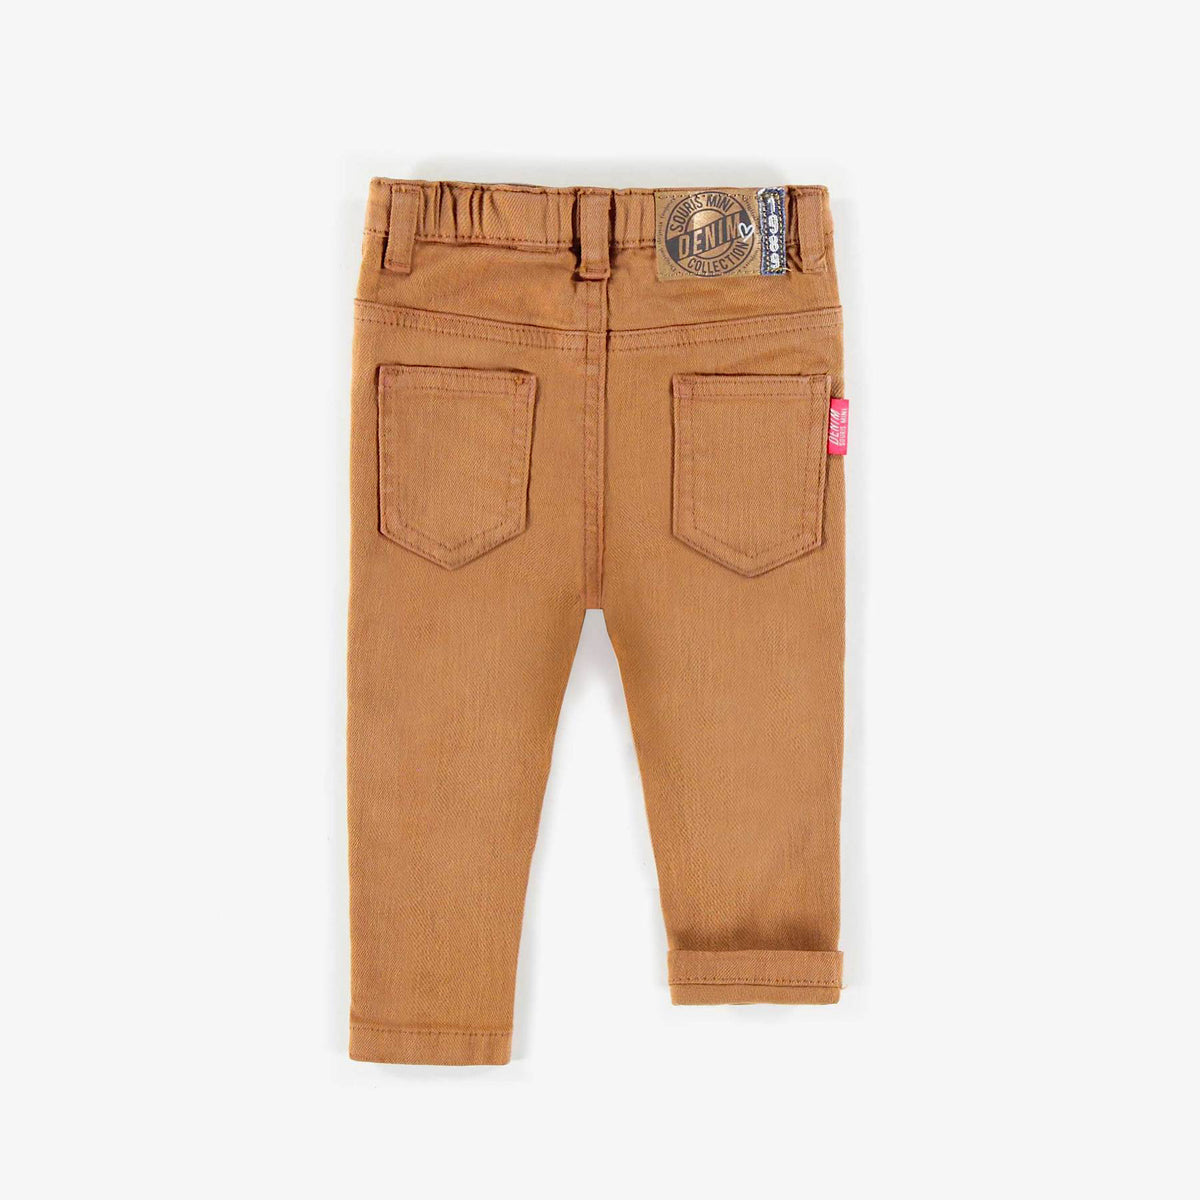 Brown Twill Pants, Baby